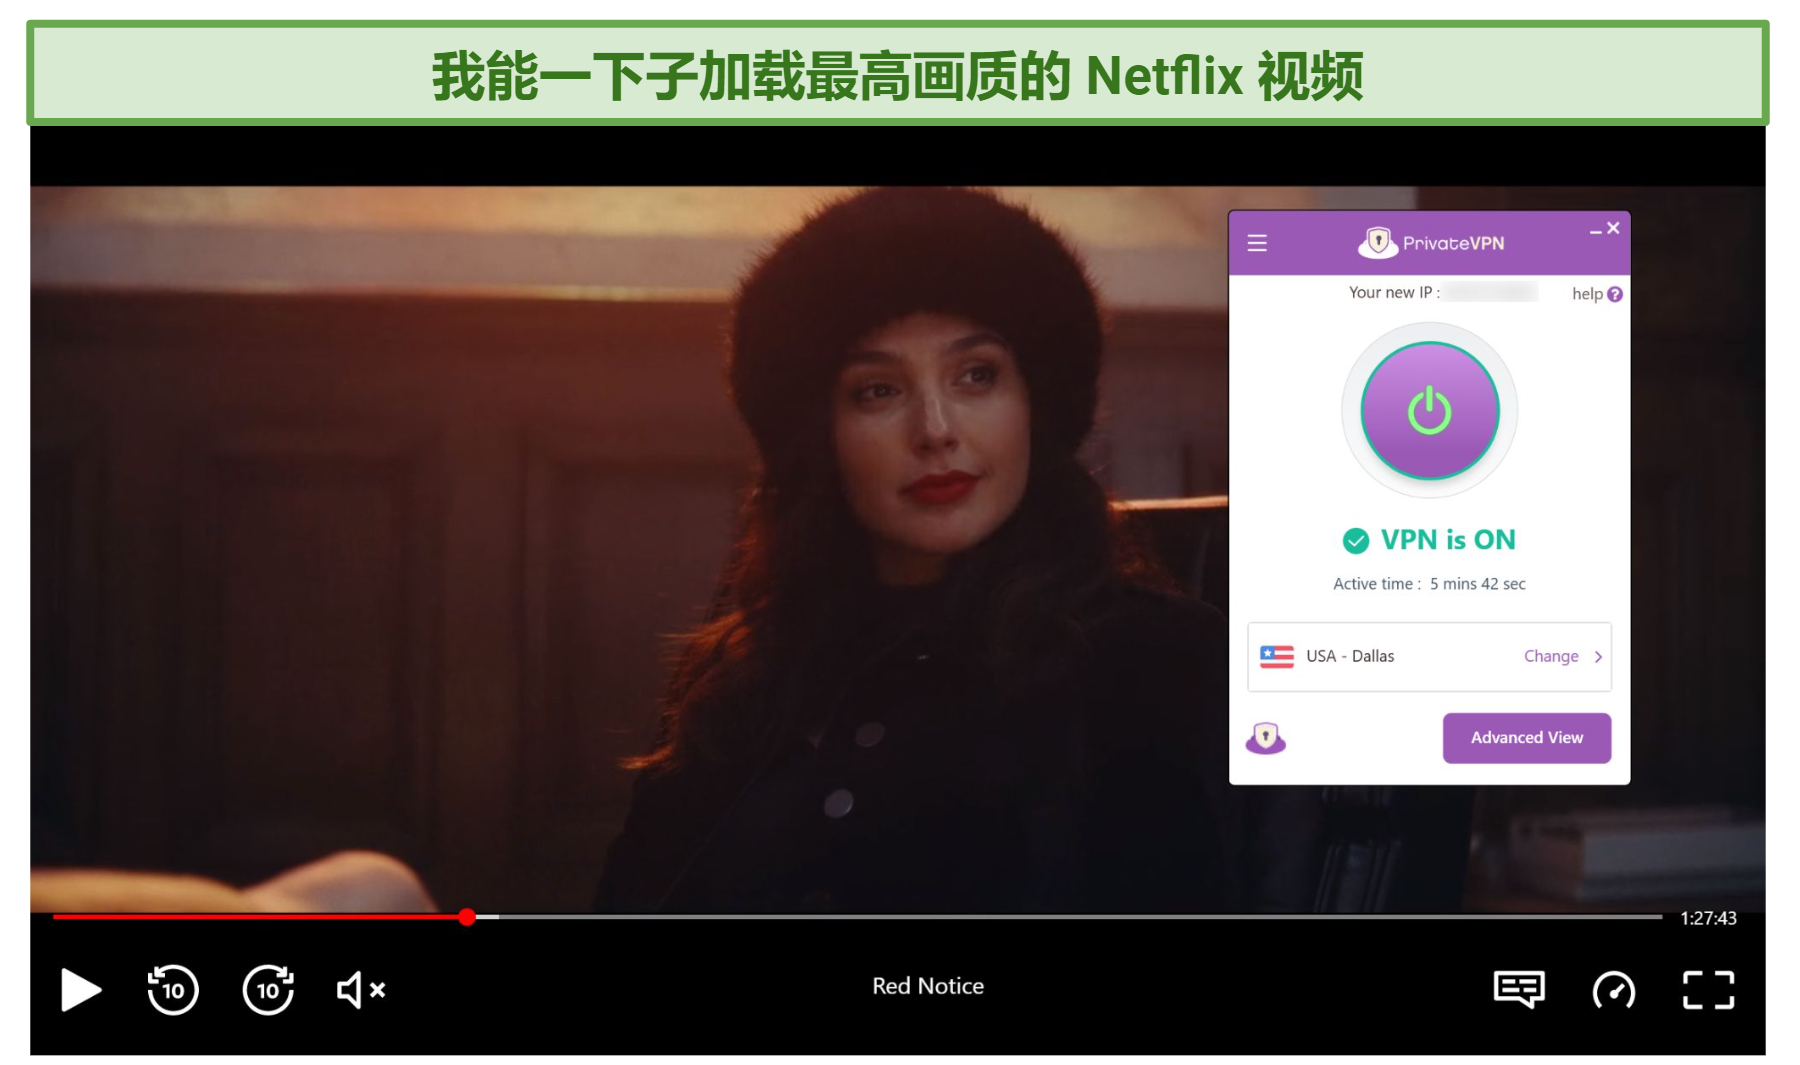 Screenshot of Netflix player streaming Red Notice while connected to PrivateVPN